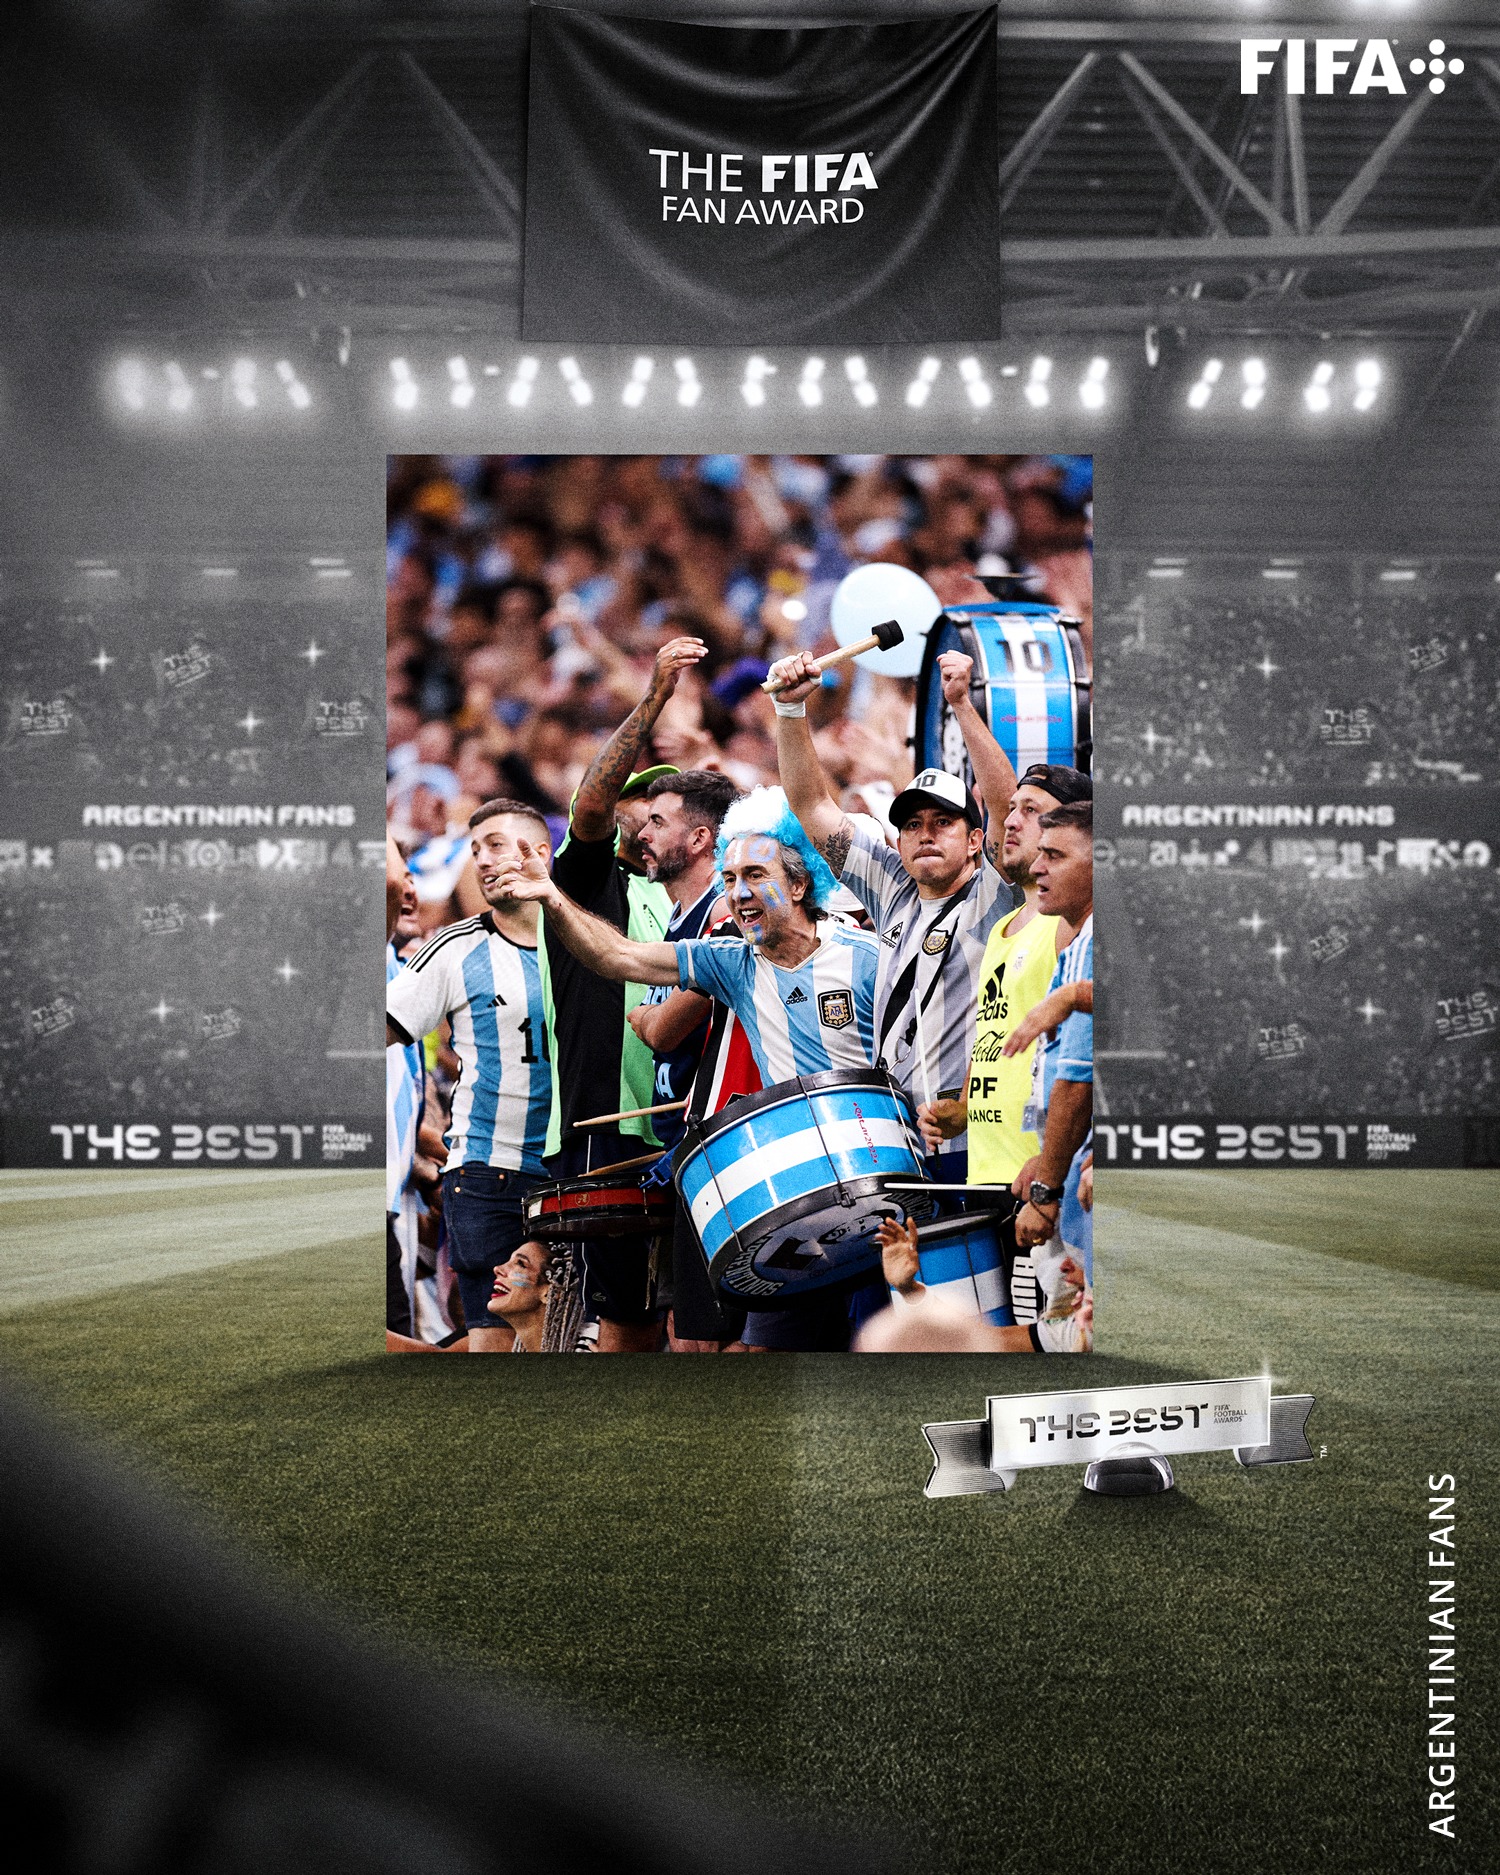 Sprængstoffer undertøj spray FIFA World Cup on Twitter: "🇦🇷 #TheBest FIFA Fan Award 2022 goes to the  Argentinian fans! https://t.co/ClFdracE3q" / Twitter